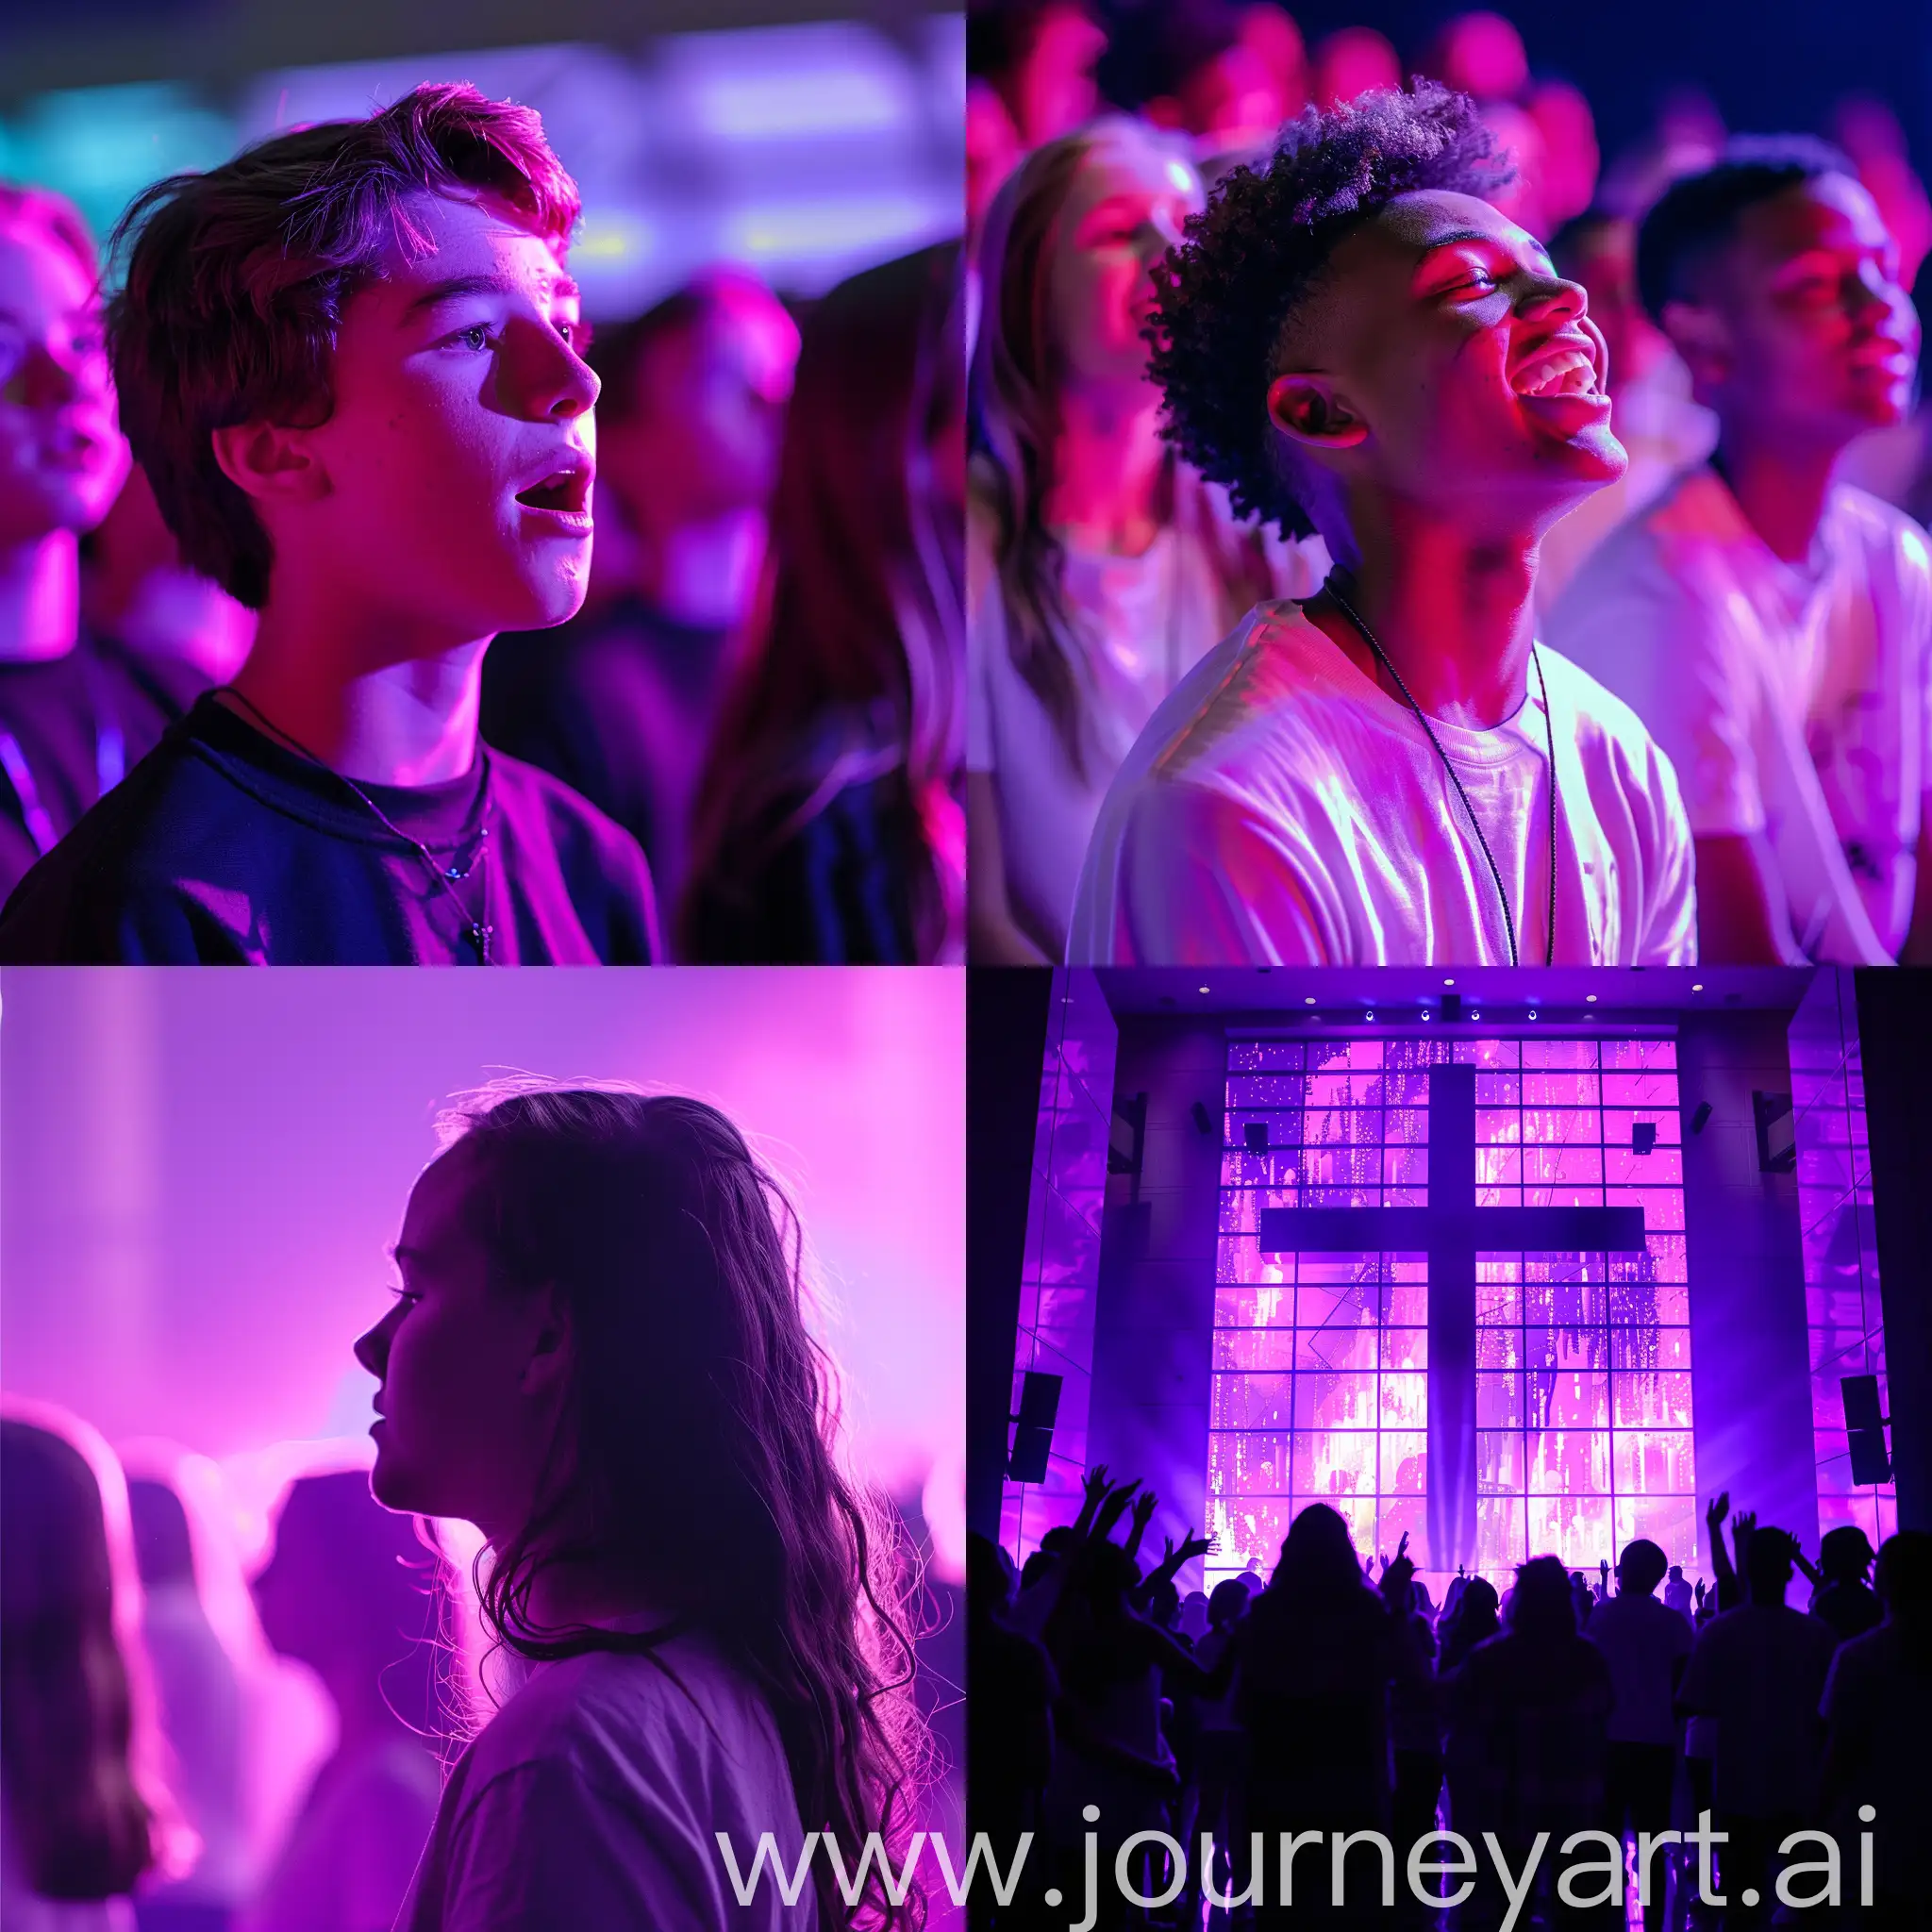 Youth-Ministry-in-the-Protestant-Church-with-Purple-Lighting